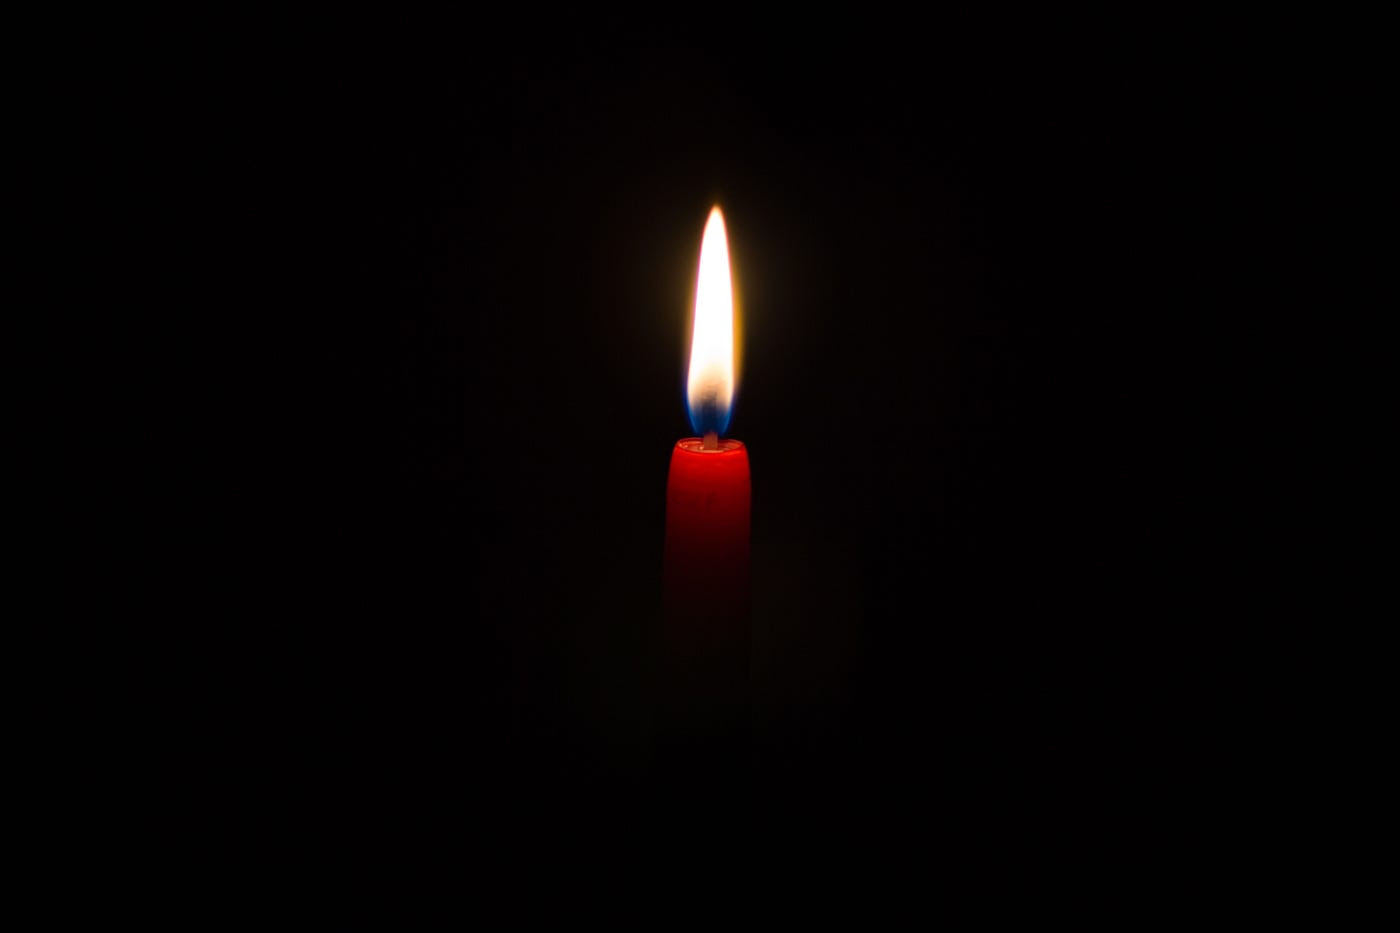 red candle with a lit flame against a black background